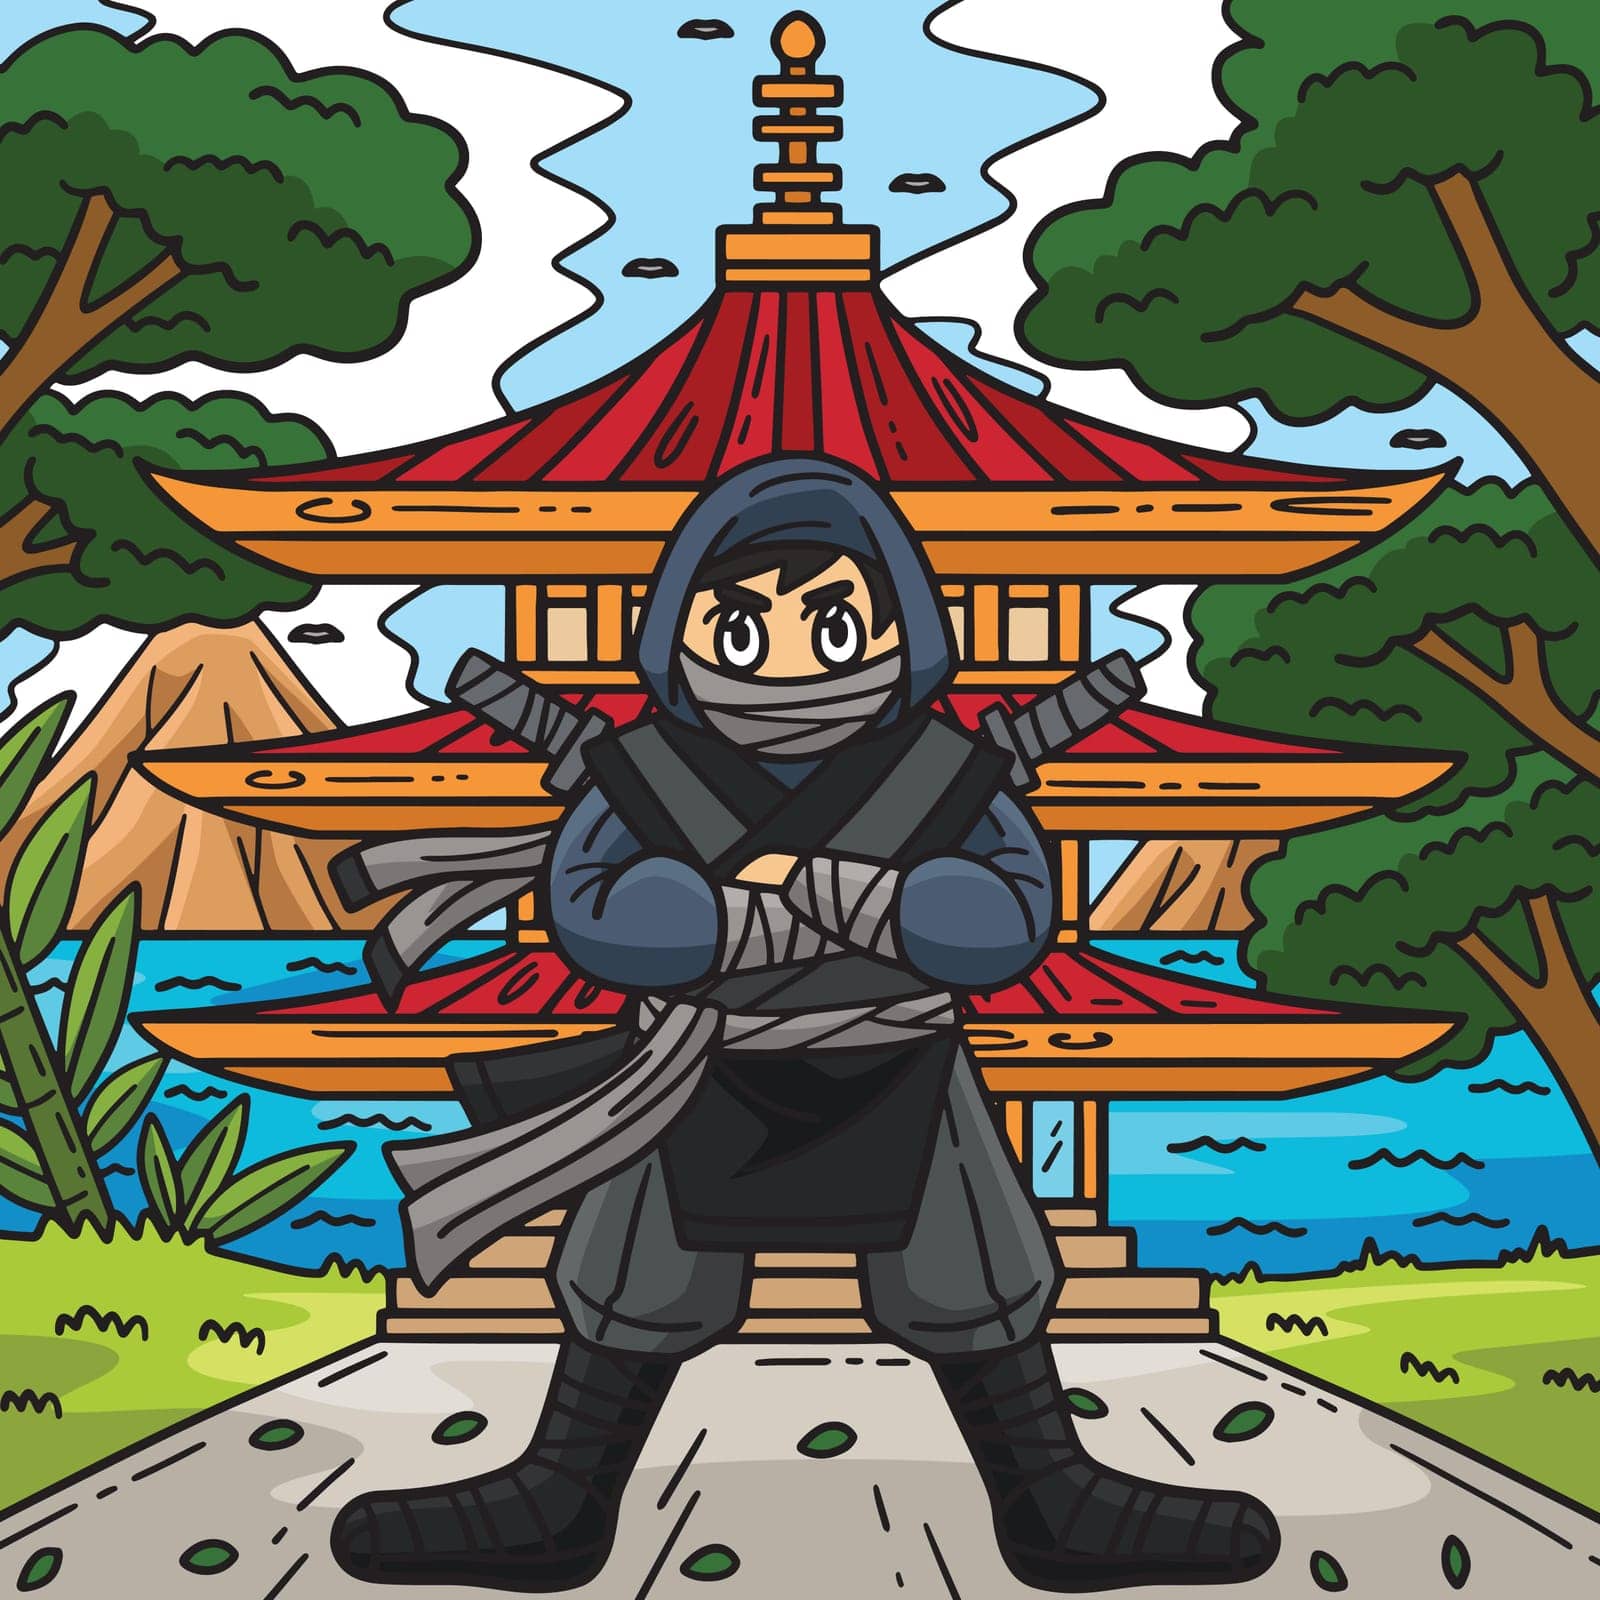 This cartoon clipart shows a Ninja in front of a Pagoda illustration.